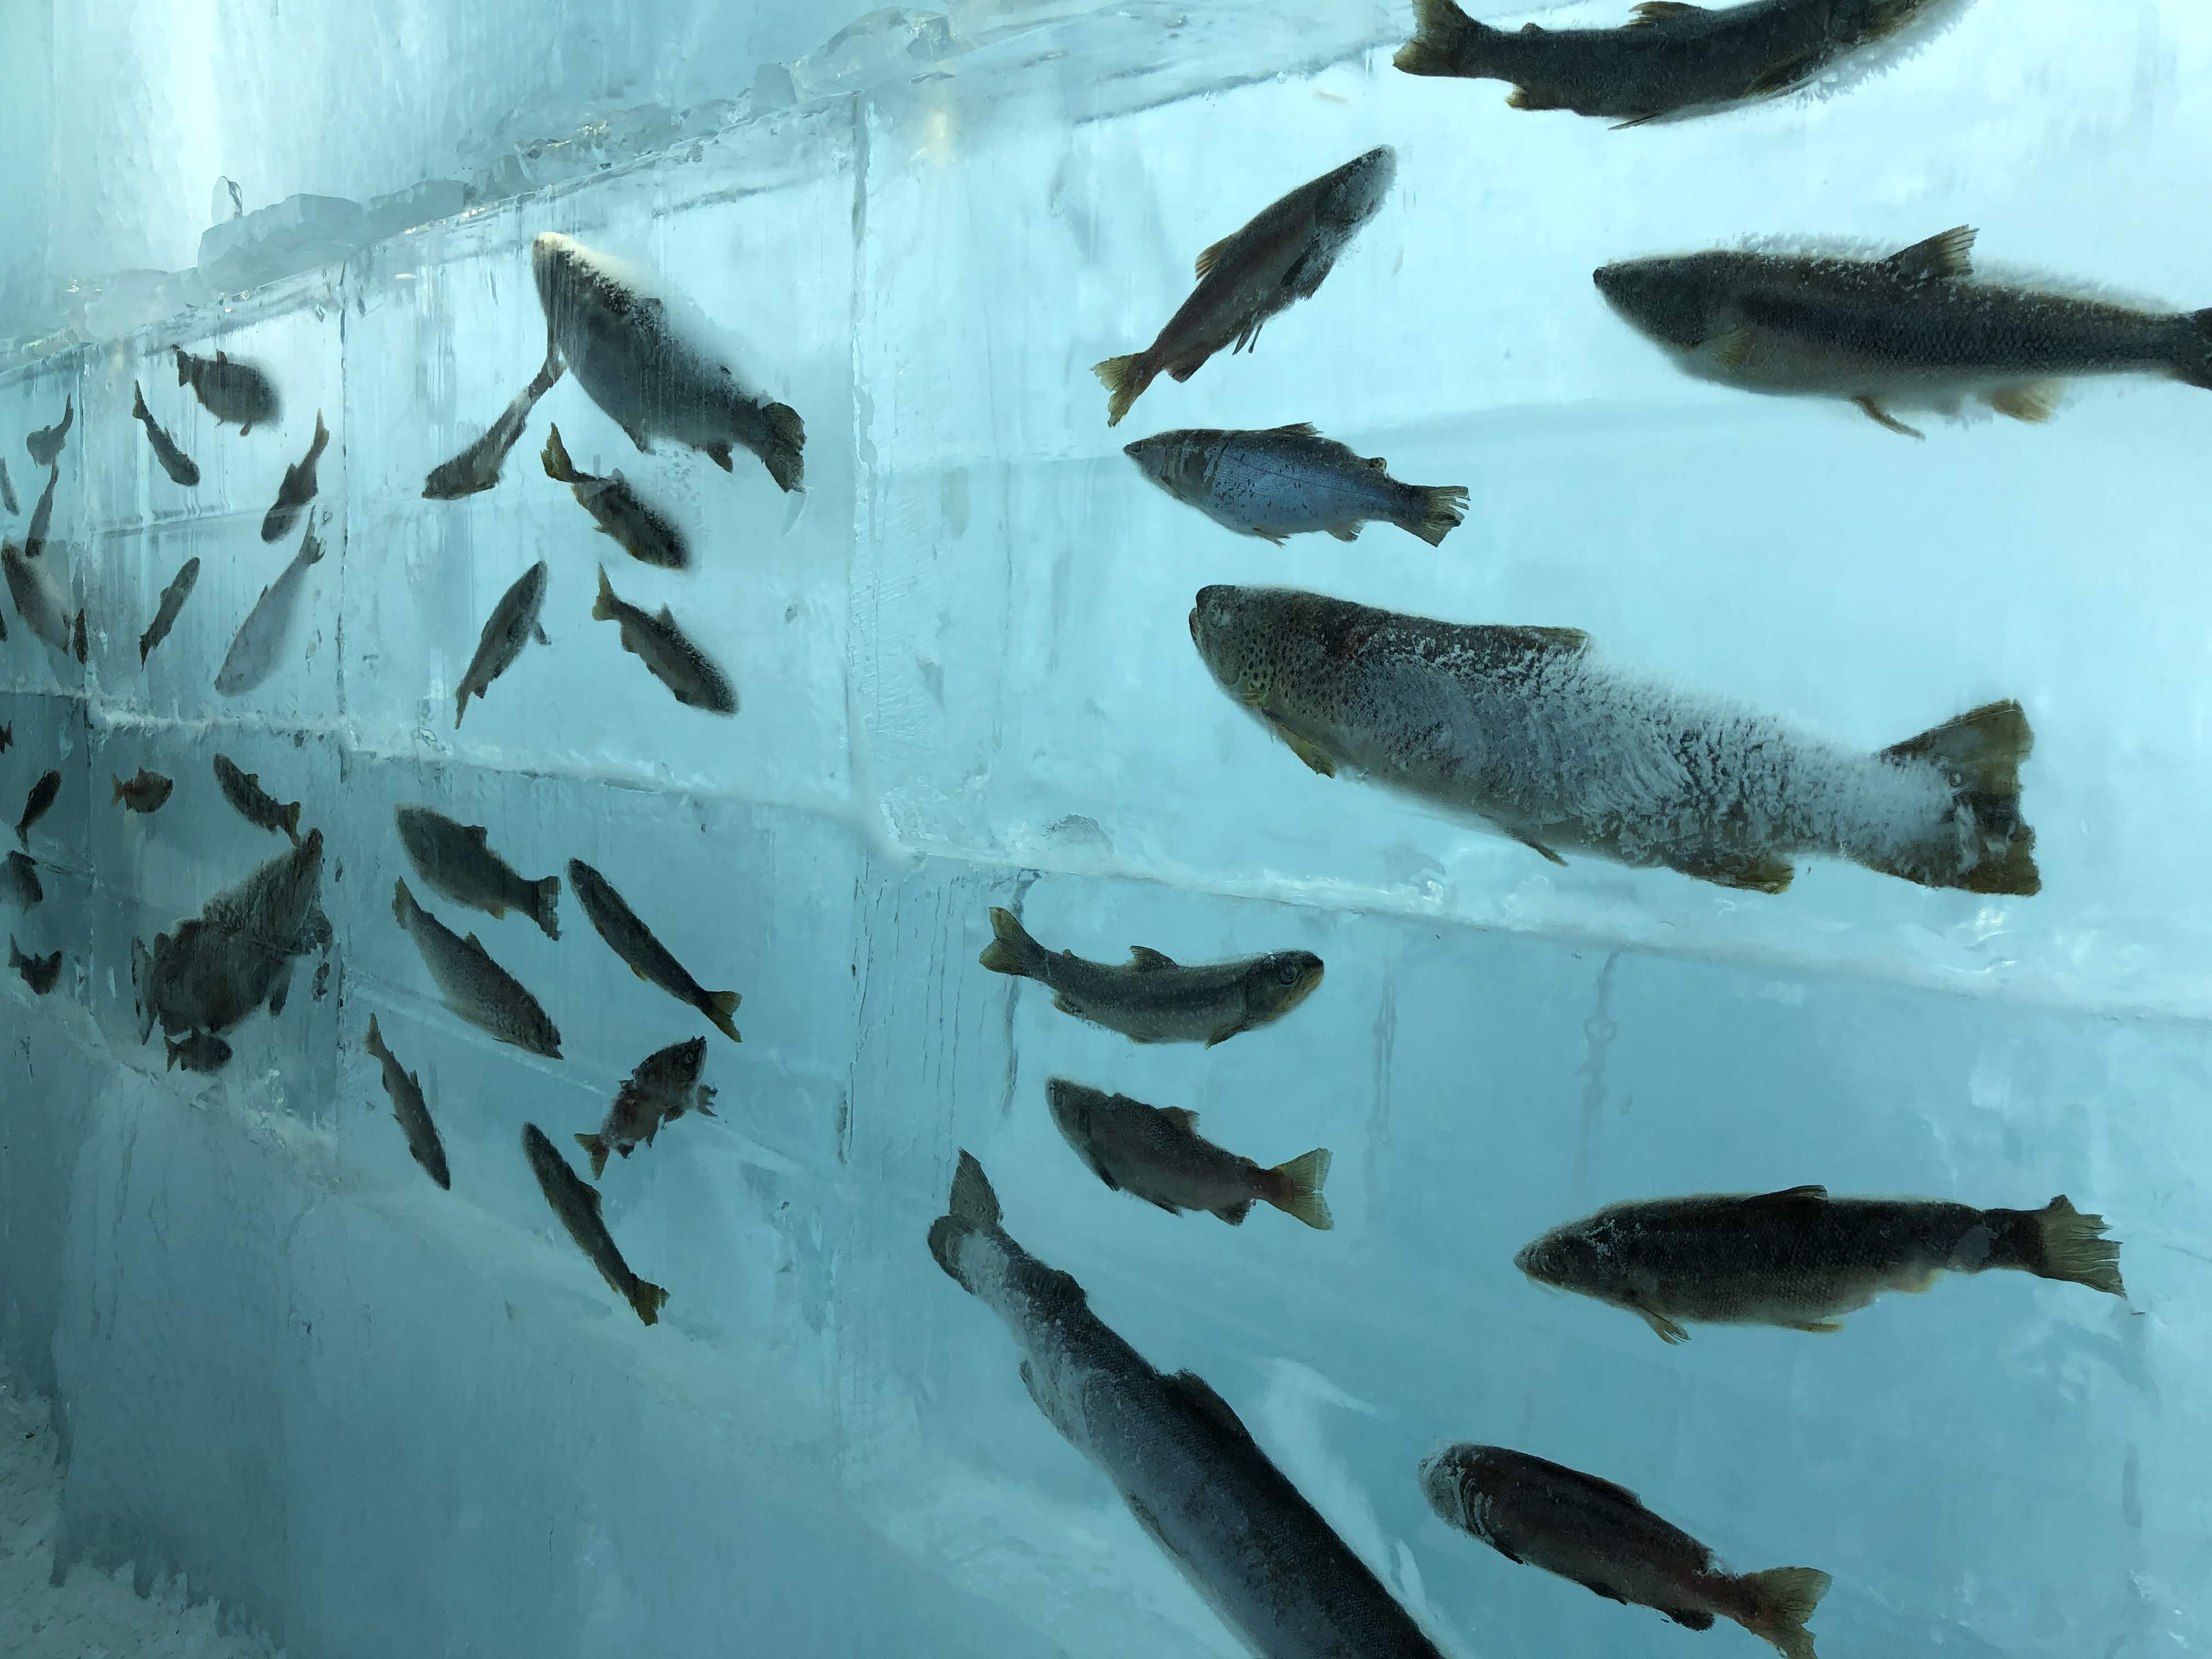 Frozen fish inside one of the ice buildings